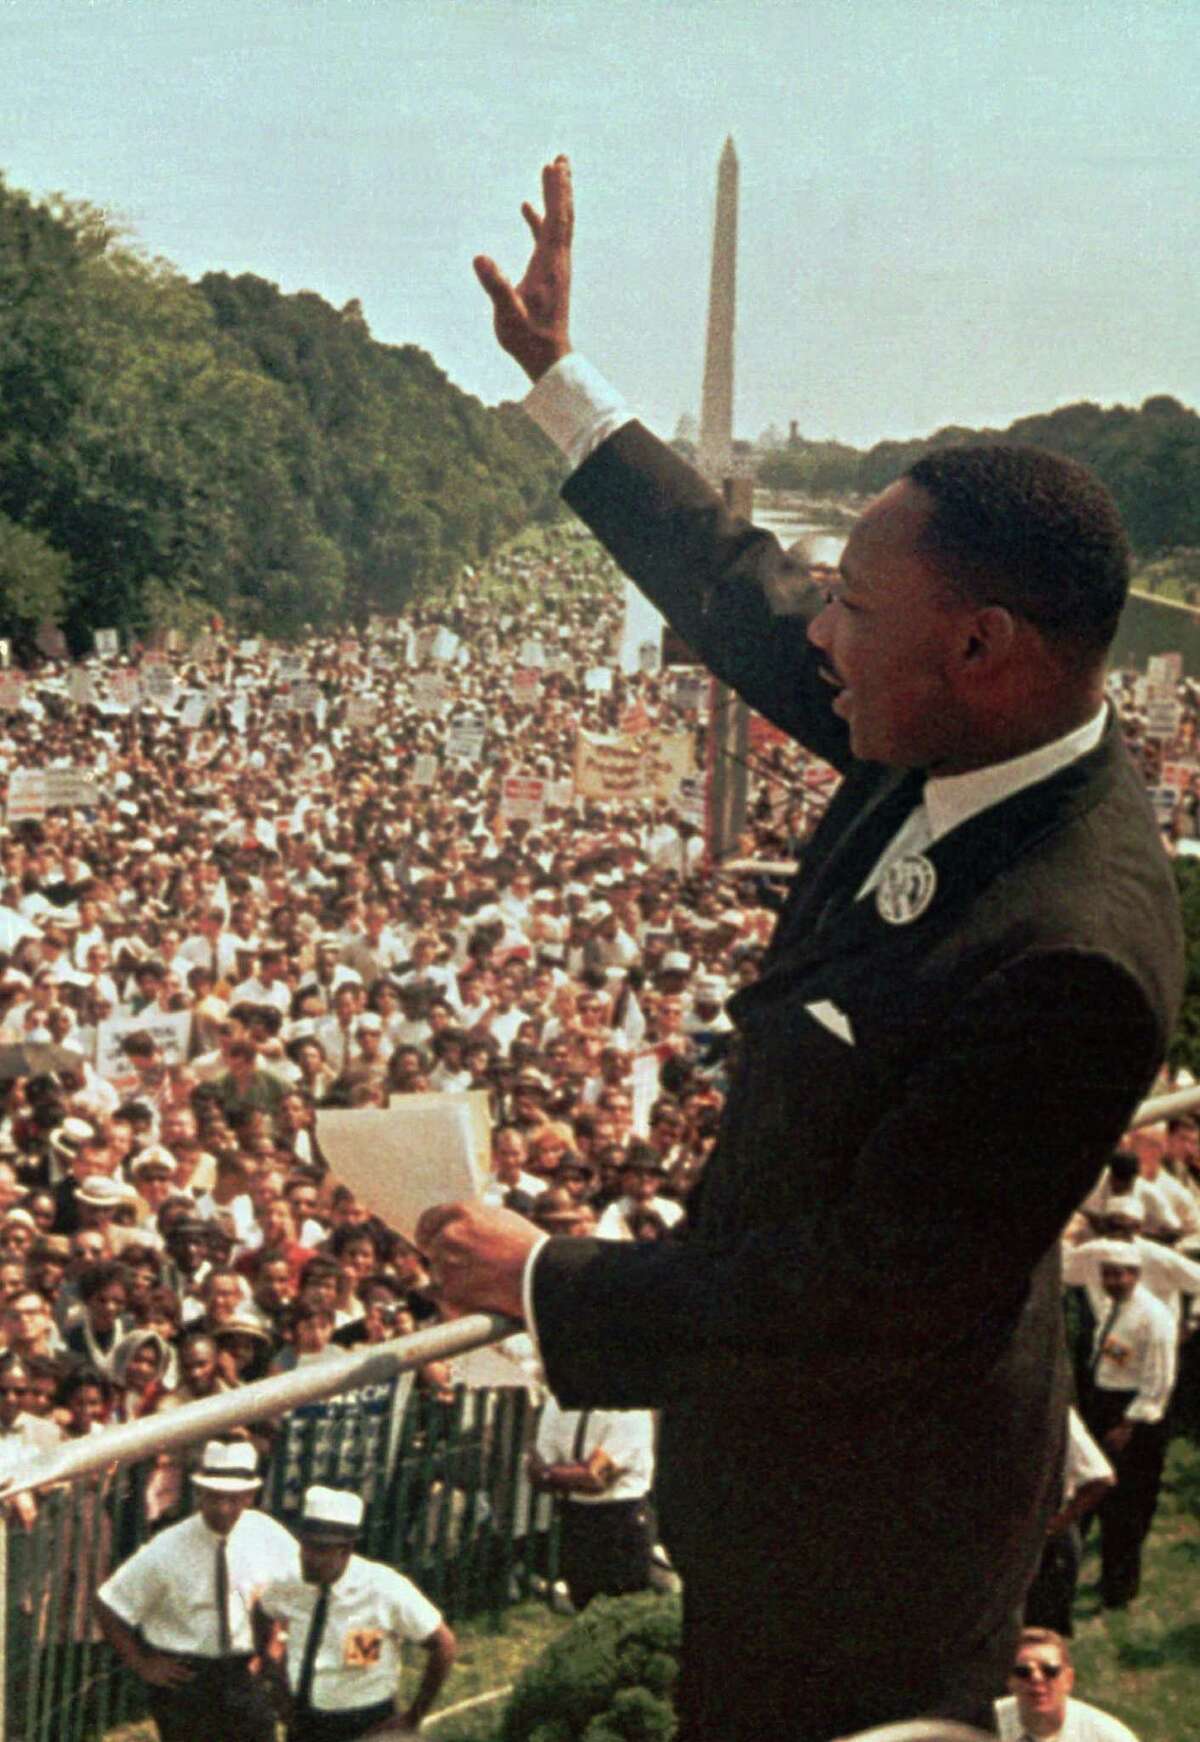 Martin Luther King Jr. acknowledges the crowd at the Lincoln Memorial for his “I Have a Dream” speech on Aug. 28, 1963. Today, we should pay less attention to the “I Have a Dream” King and more to the “Where Do We Go from Here?” King.